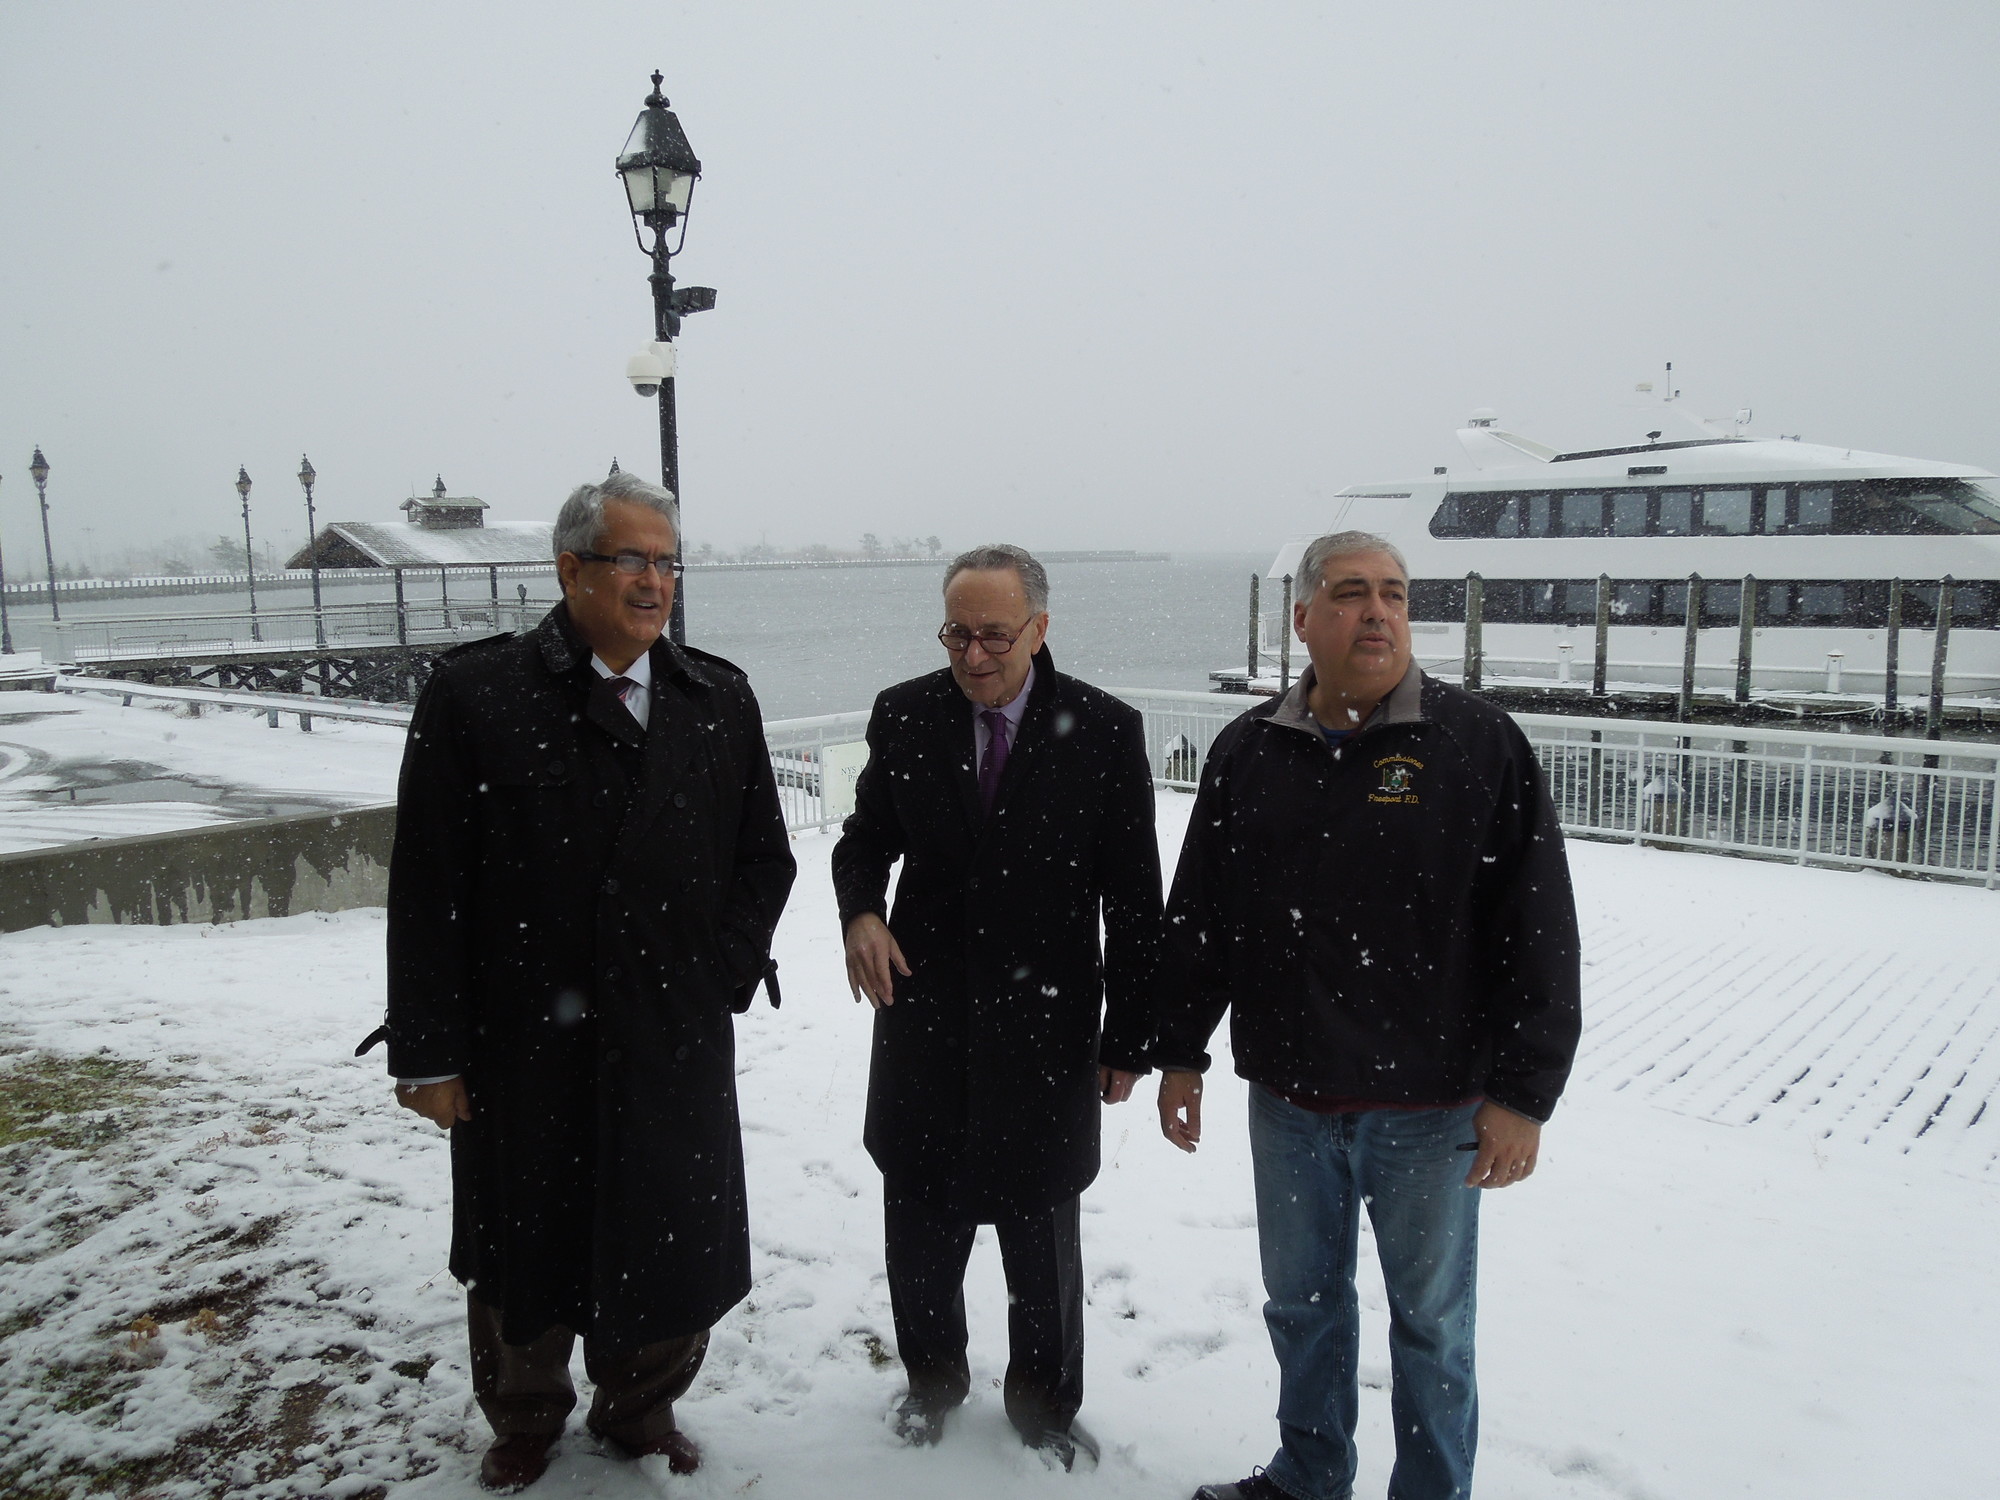 U.S. Sen. Charles Schumer, center, was in Freeport on Monday to urge the Army Corp of Engineers to fund a study to control flooding on the South Shore. With him were Hempstead Town Supervisor Anthony Santino, left, and Freeport Deputy Mayor Jorge Martinez.